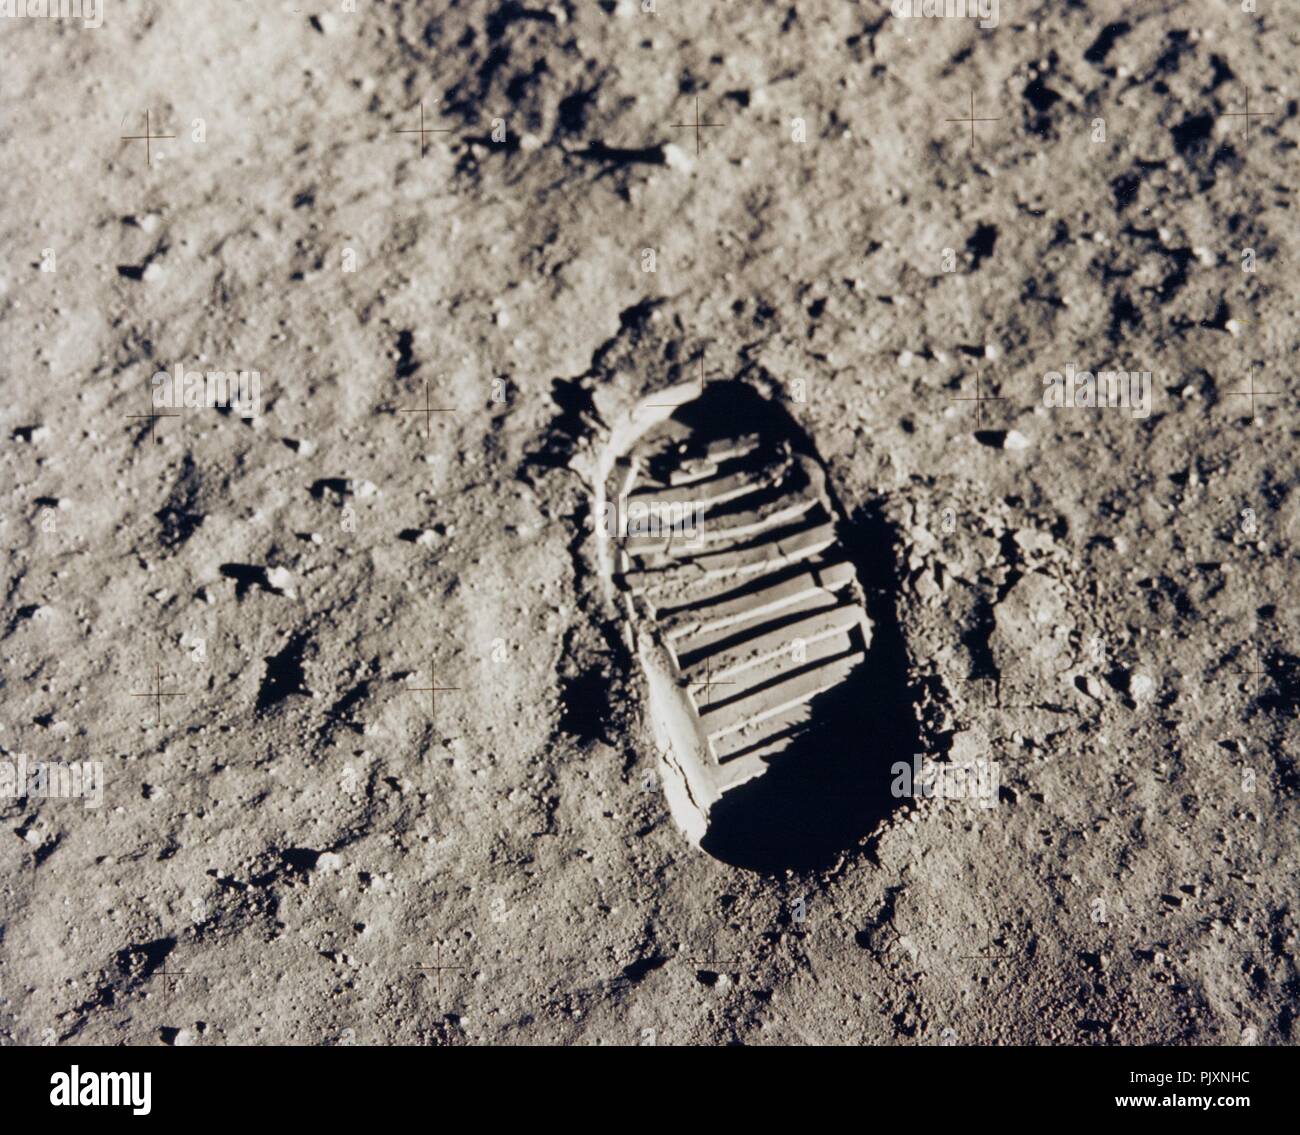 The Moon - (FILE) -- One of the first steps taken on the Moon, this is an image of Buzz Aldrin's bootprint from the Apollo 11 mission. Neil Armstrong and Buzz Aldrin walked on the Moon on July 20, 1969. Credit: NASA via CNP /MediaPunch Stock Photo